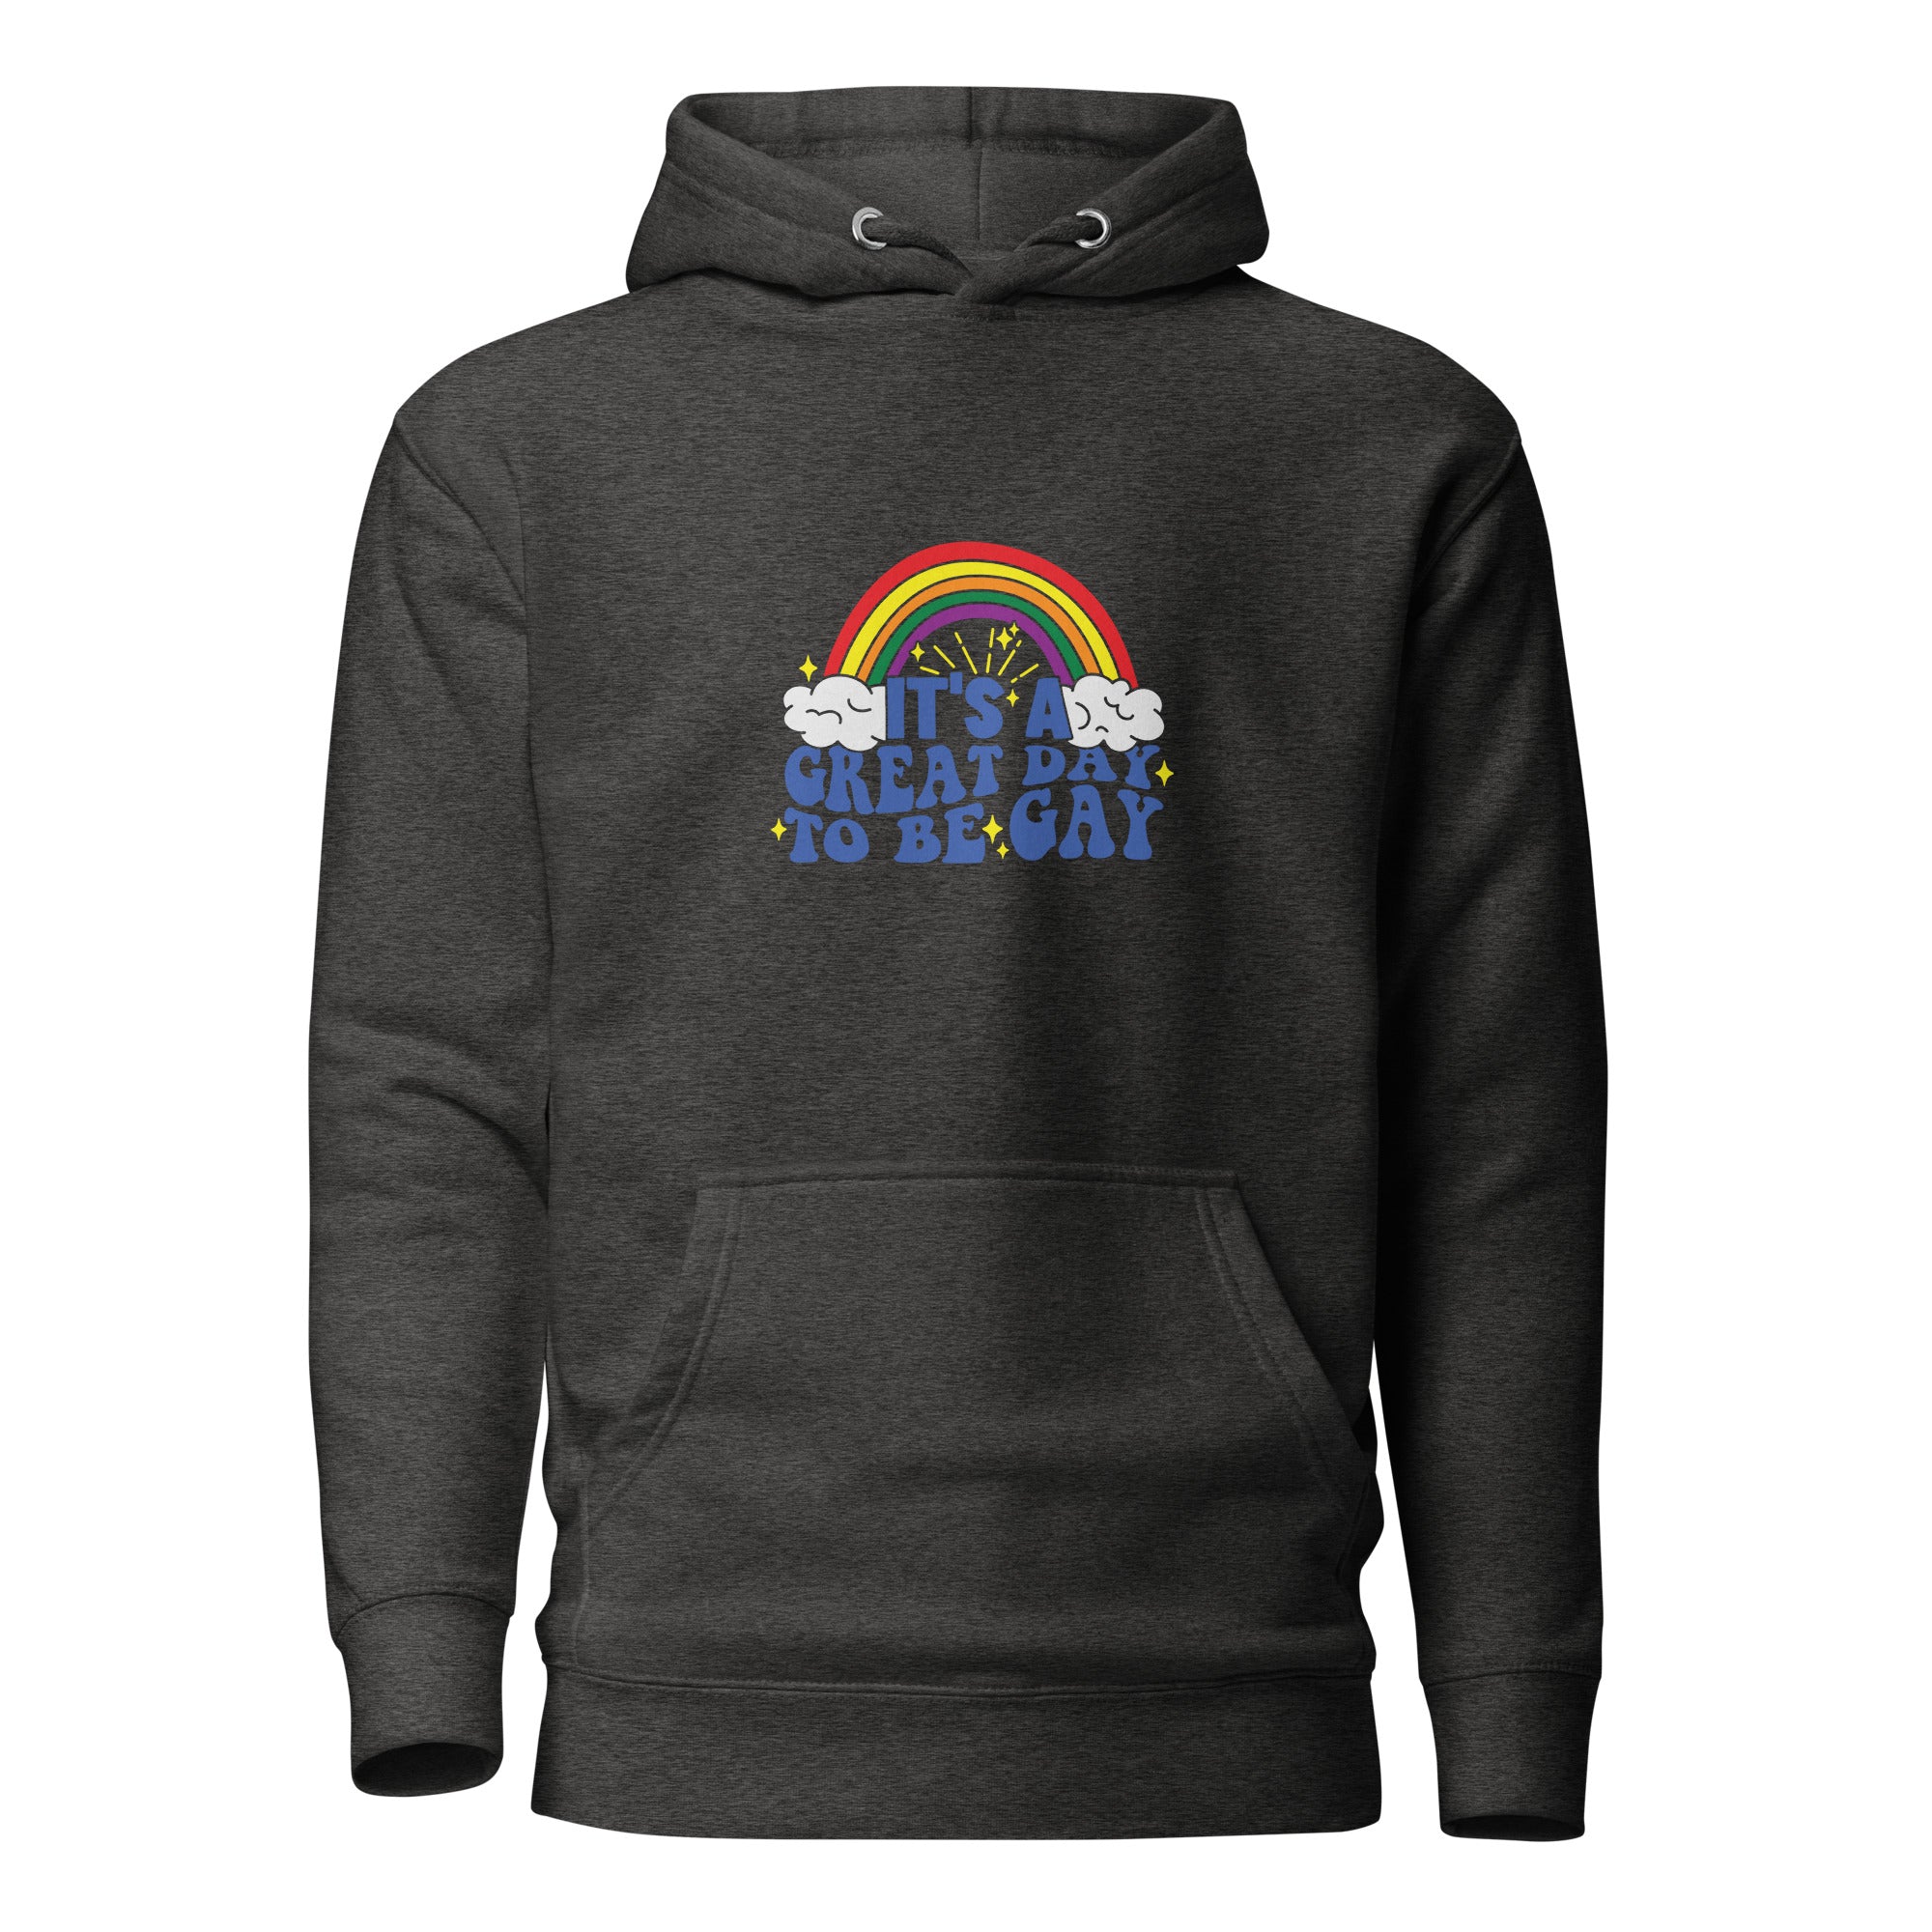 Unisex Hoodie- It's a great day to be gay